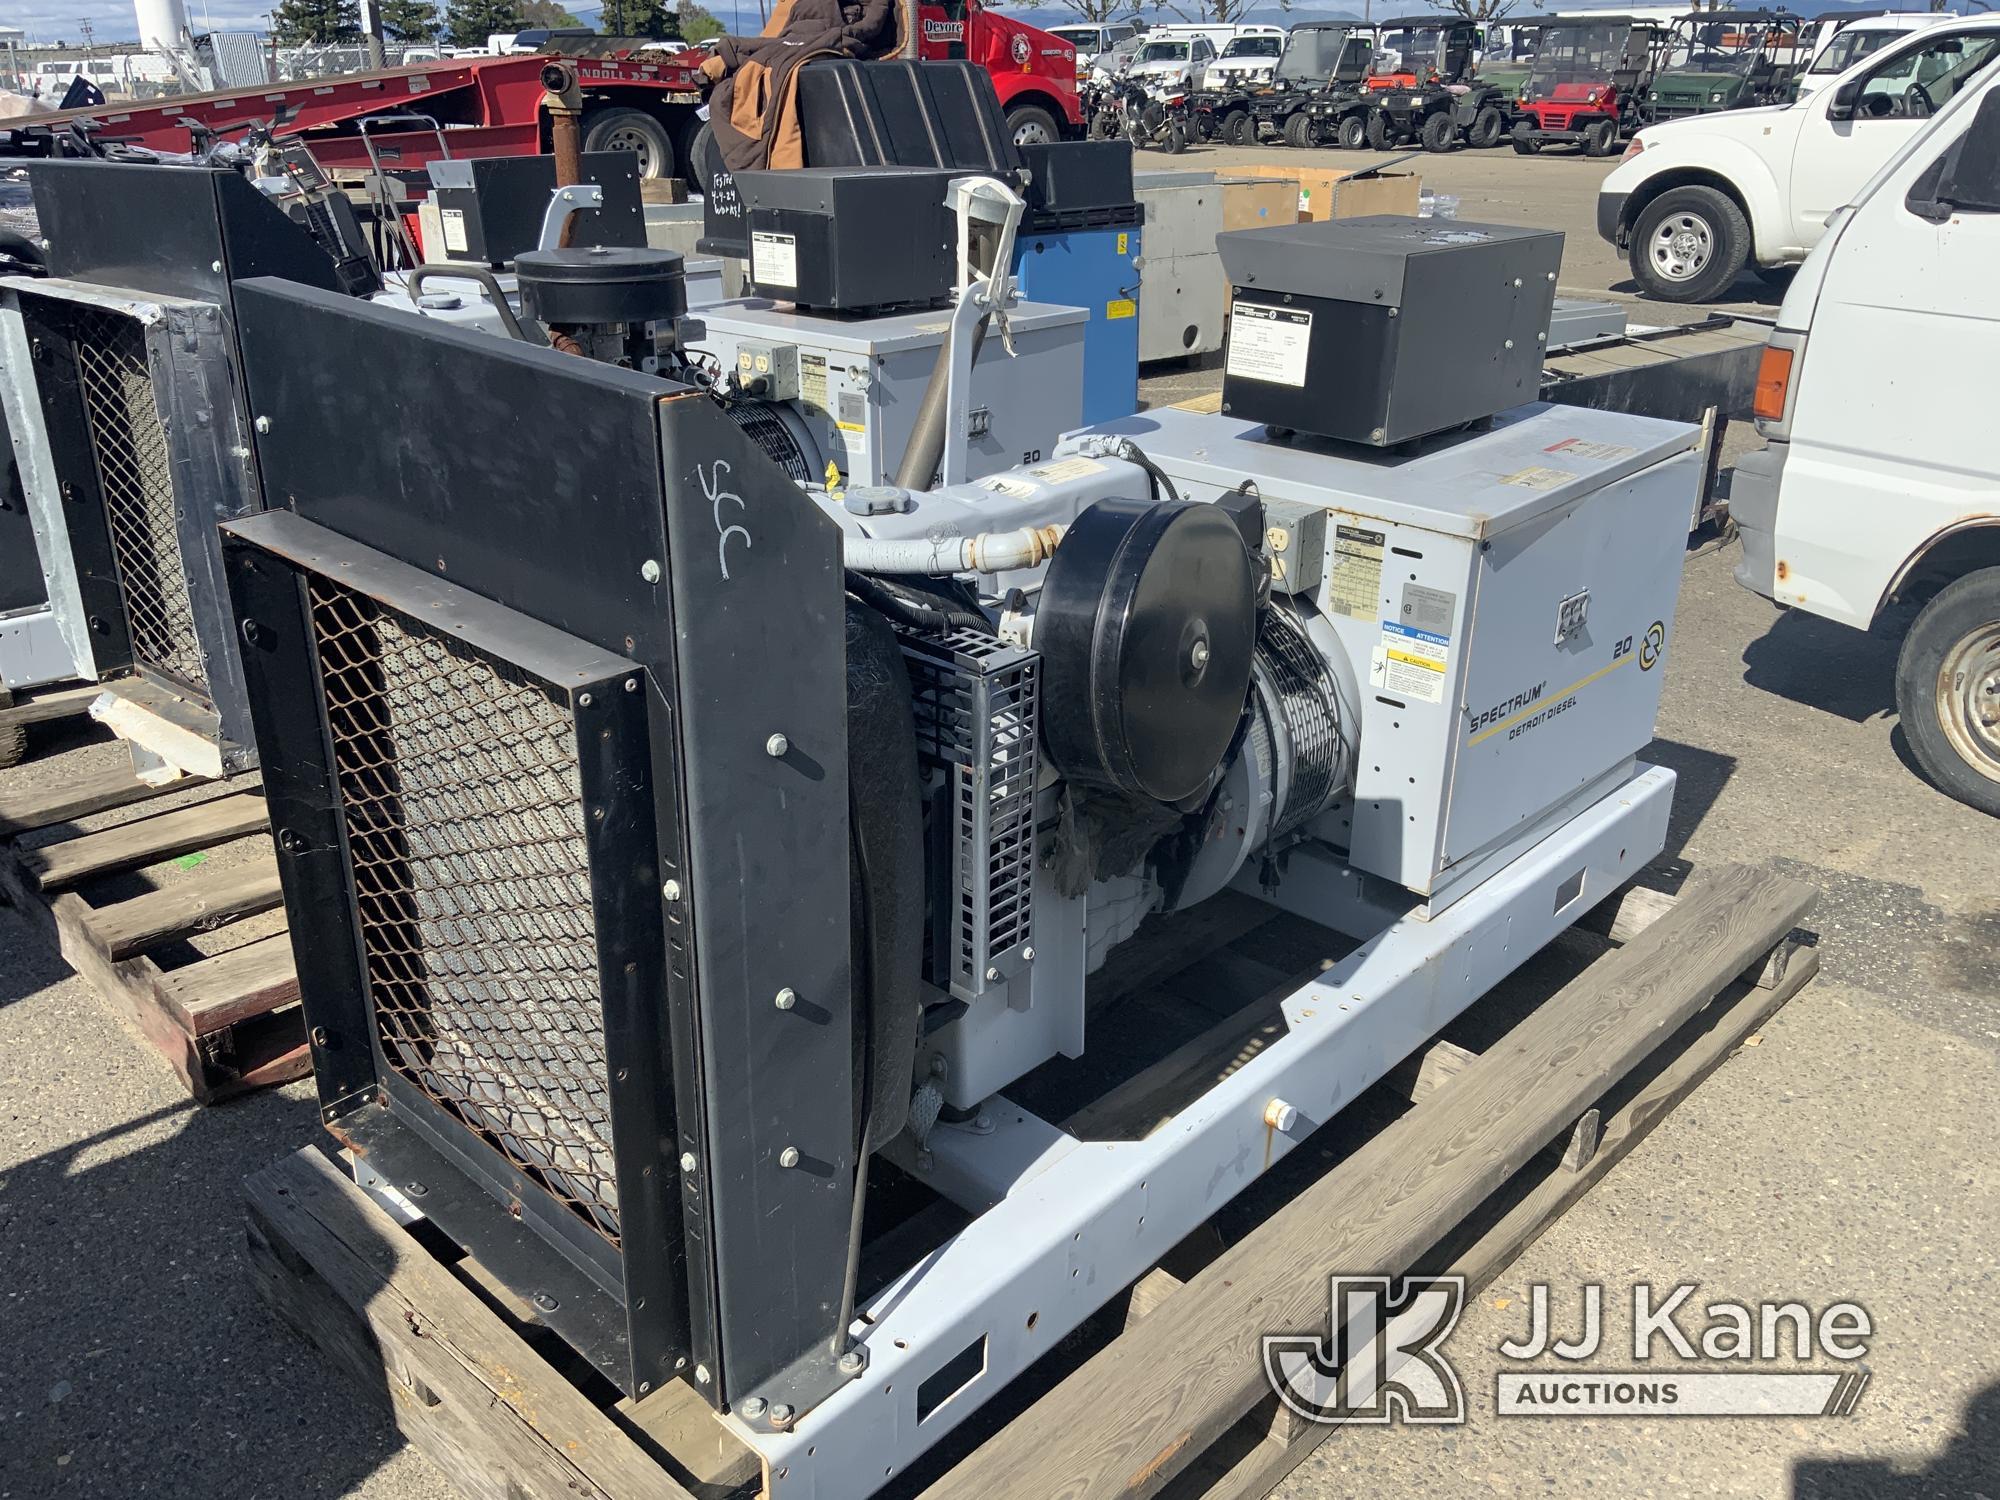 (Dixon, CA) Spectrum 20 Generator (Used) NOTE: This unit is being sold AS IS/WHERE IS via Timed Auct